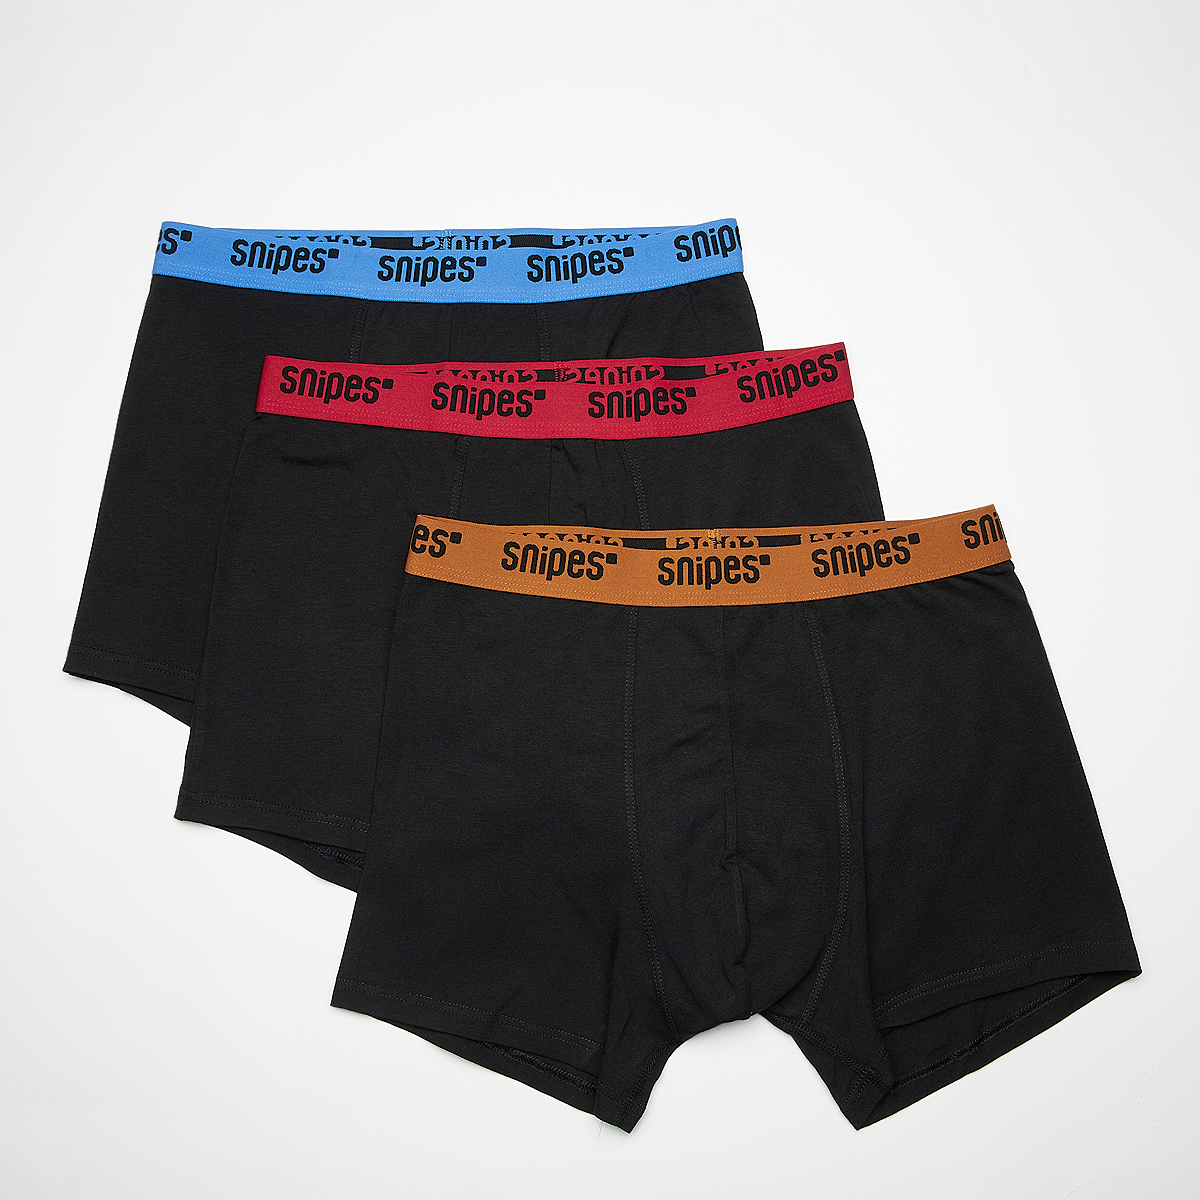 Contrast Tape Briefs Boxershorts (3 Pack) product